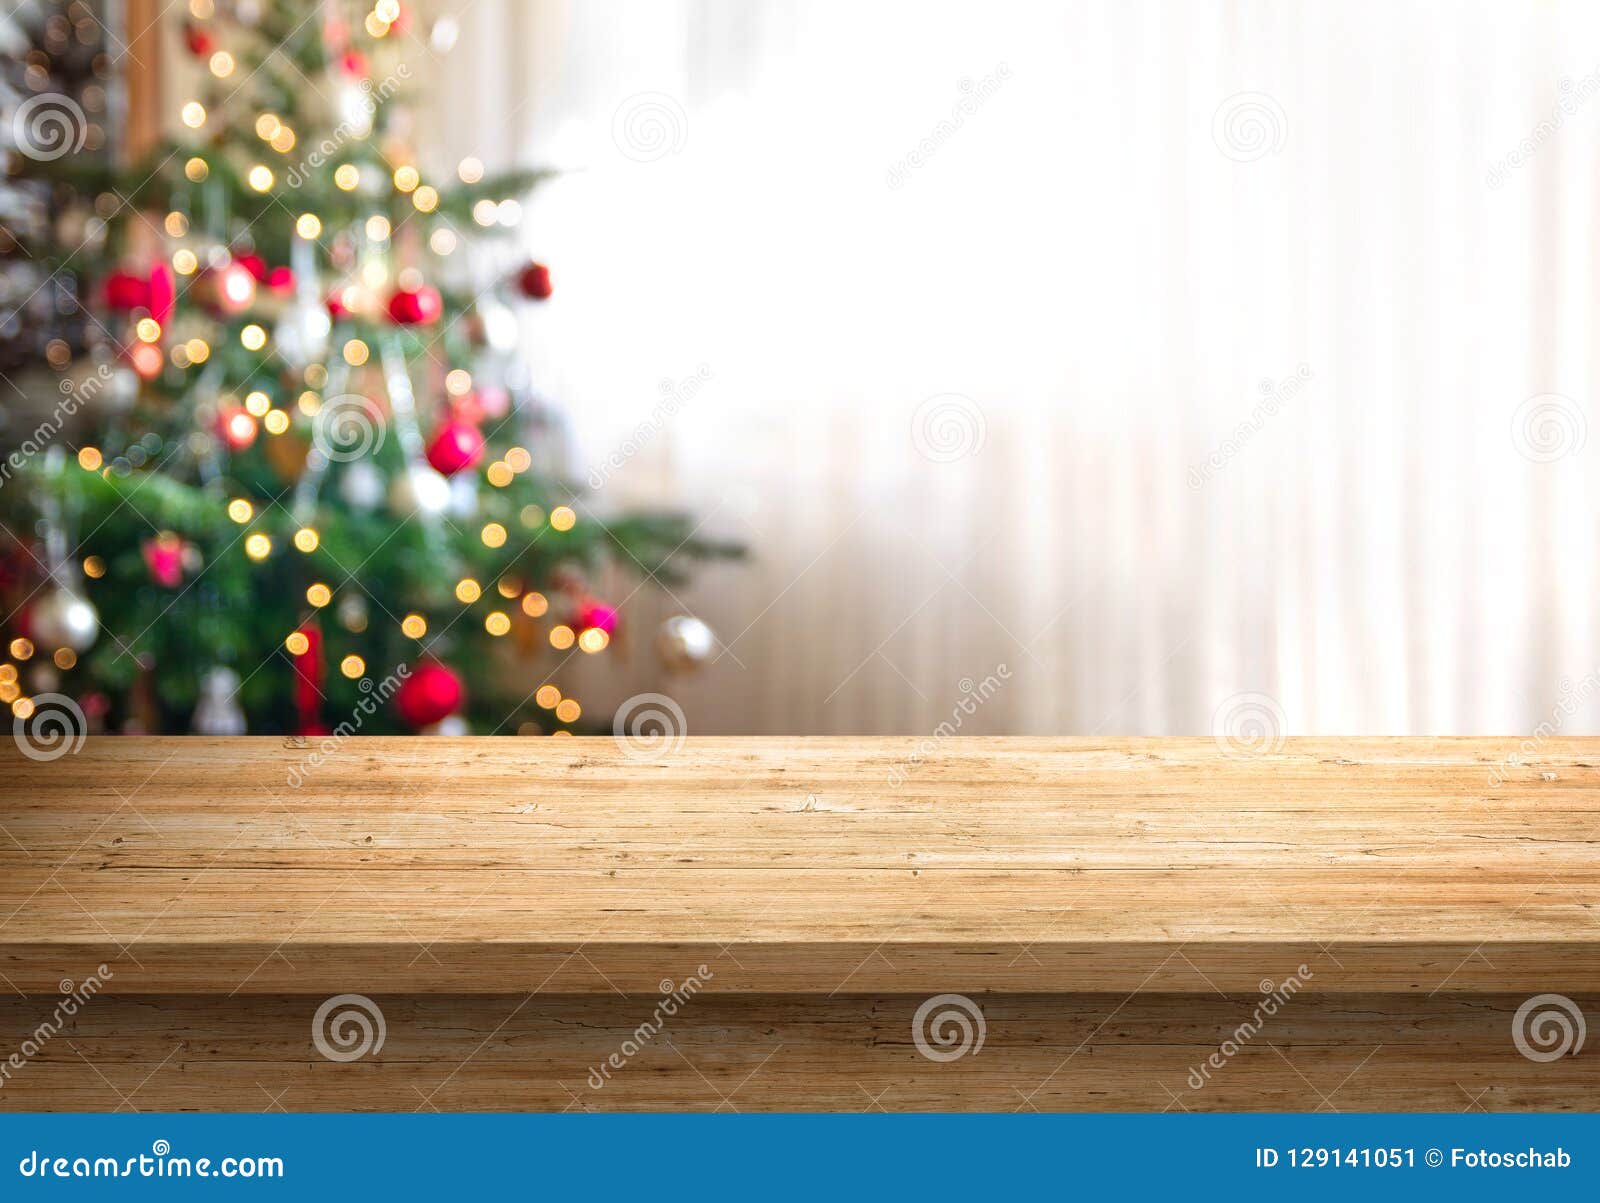 empty table top and christmas tree in background